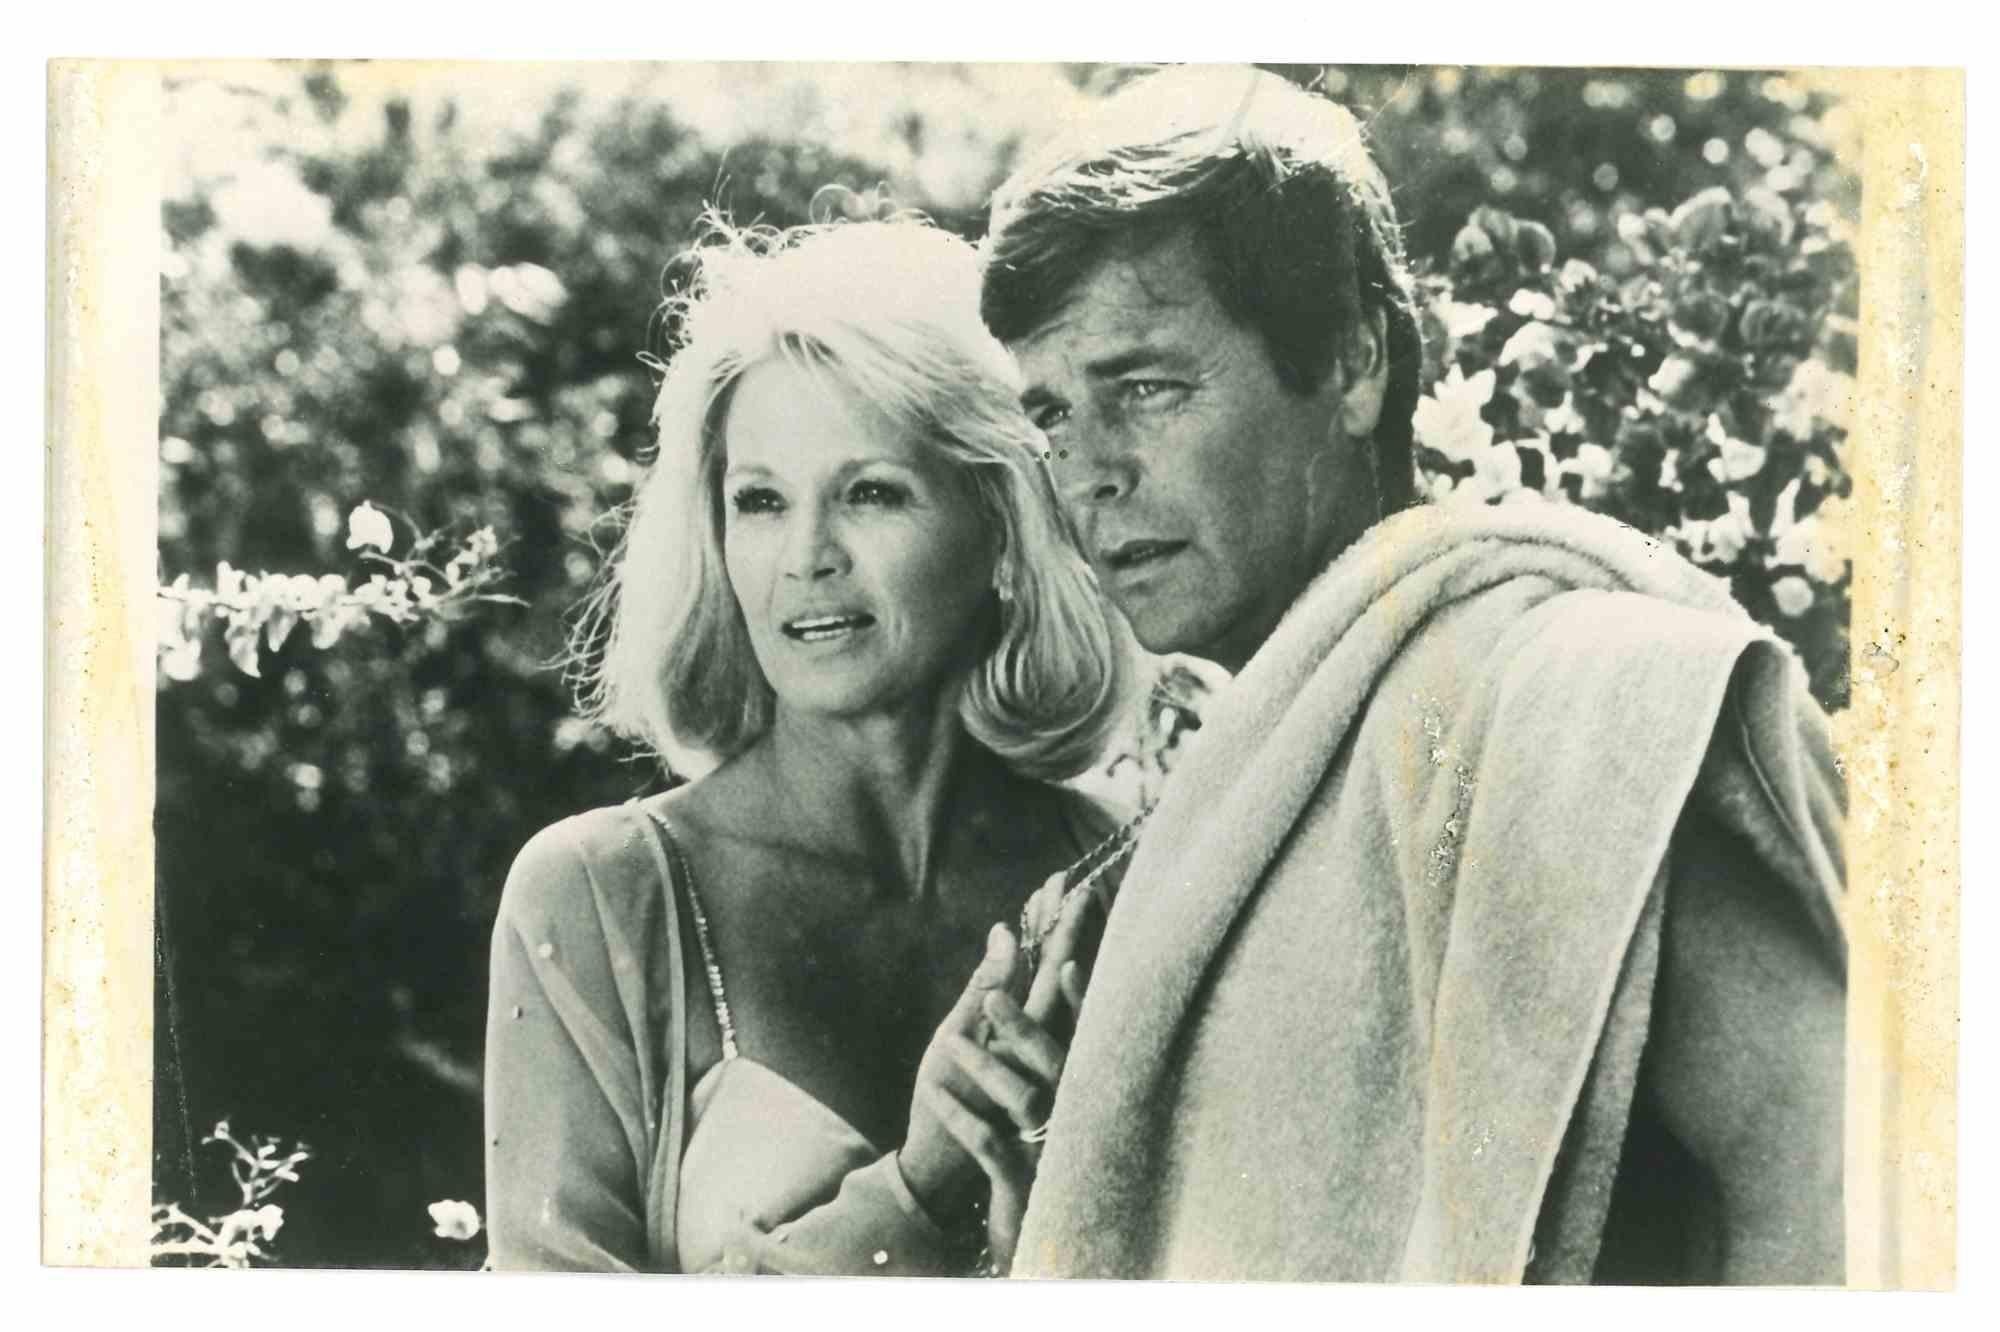 Unknown Figurative Photograph - Robert Wagner and Angie Dickinson - Vintage Photograph - 1970s